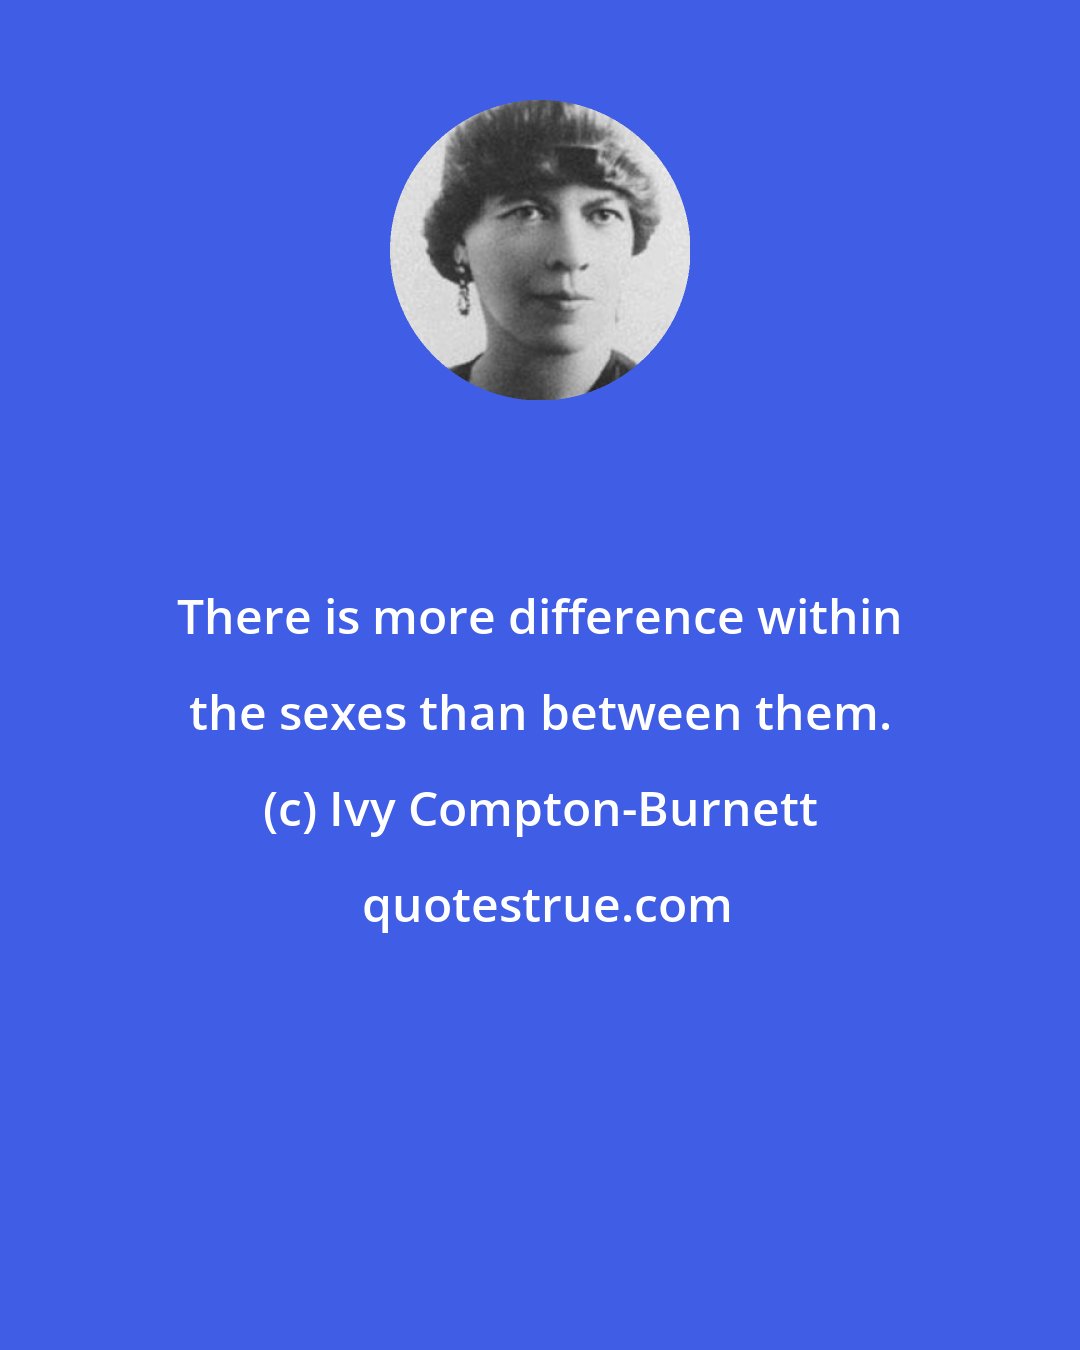 Ivy Compton-Burnett: There is more difference within the sexes than between them.